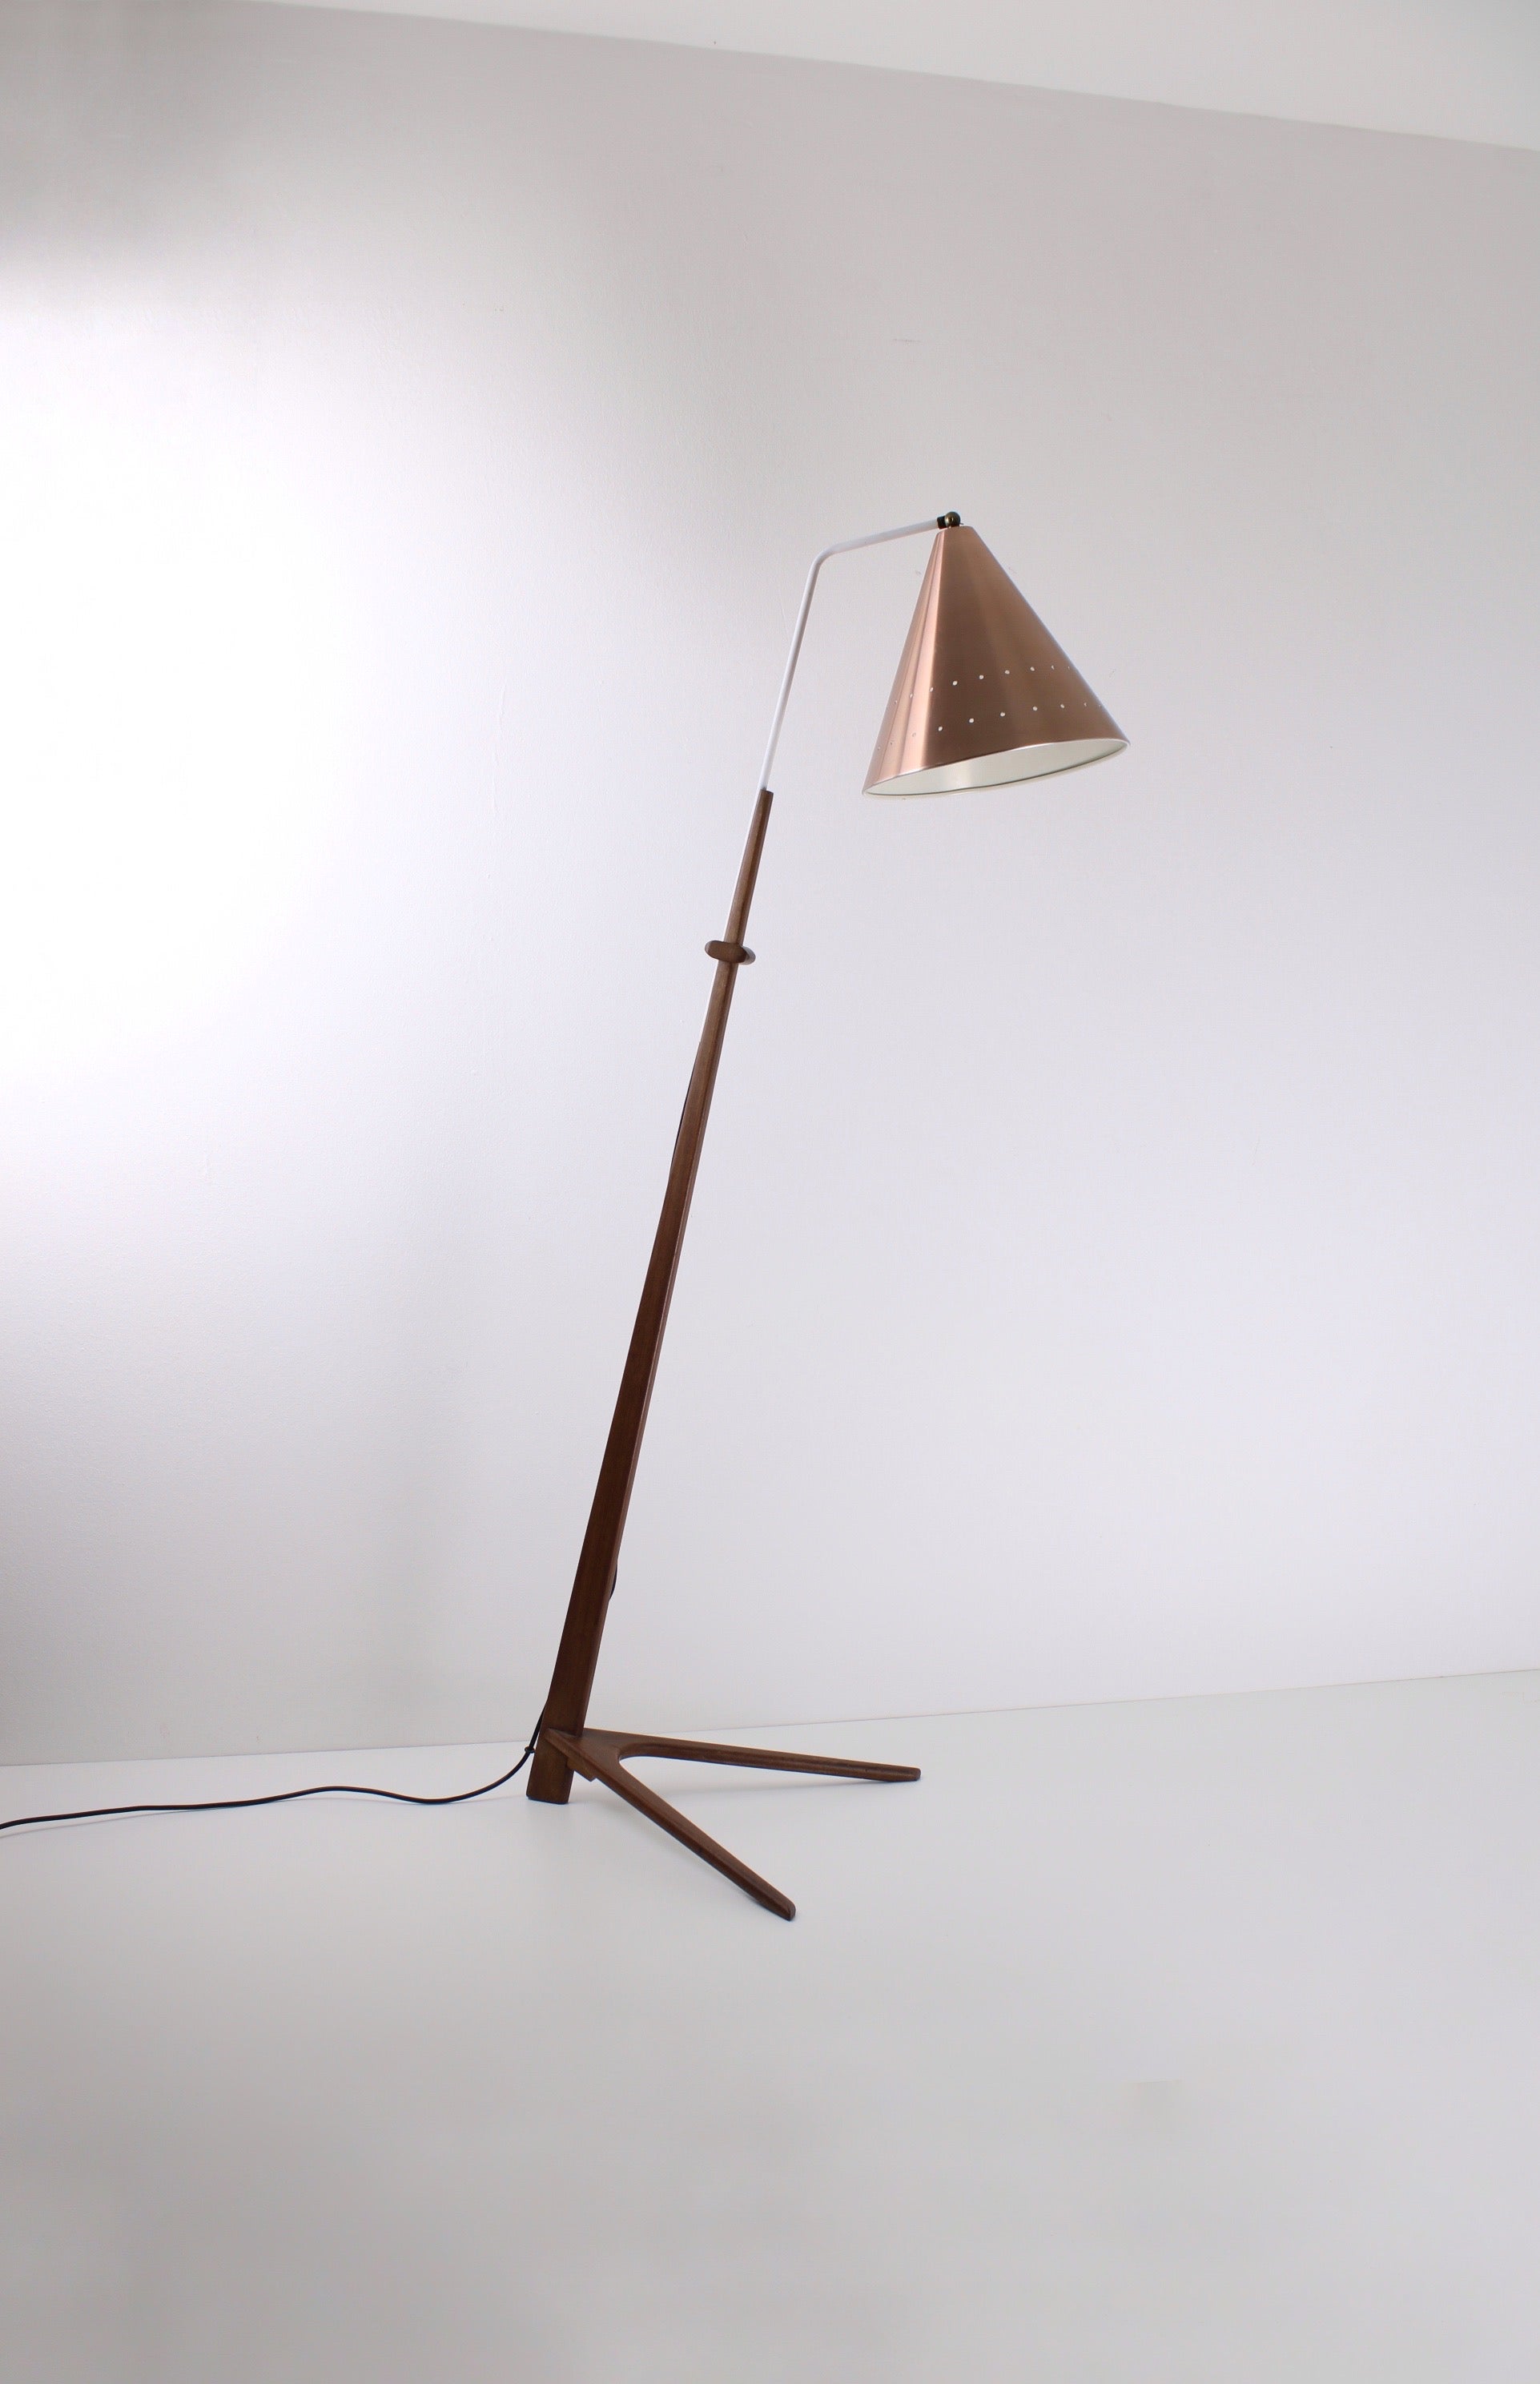 Very rare floor lamp called the Boomerang, named after the shape of the base. Created by a presumably English designer, Nigel Walters, in circa 1958. Manufactured by Hagoort Lampen in the Netherlands. This design is highly influenced by the